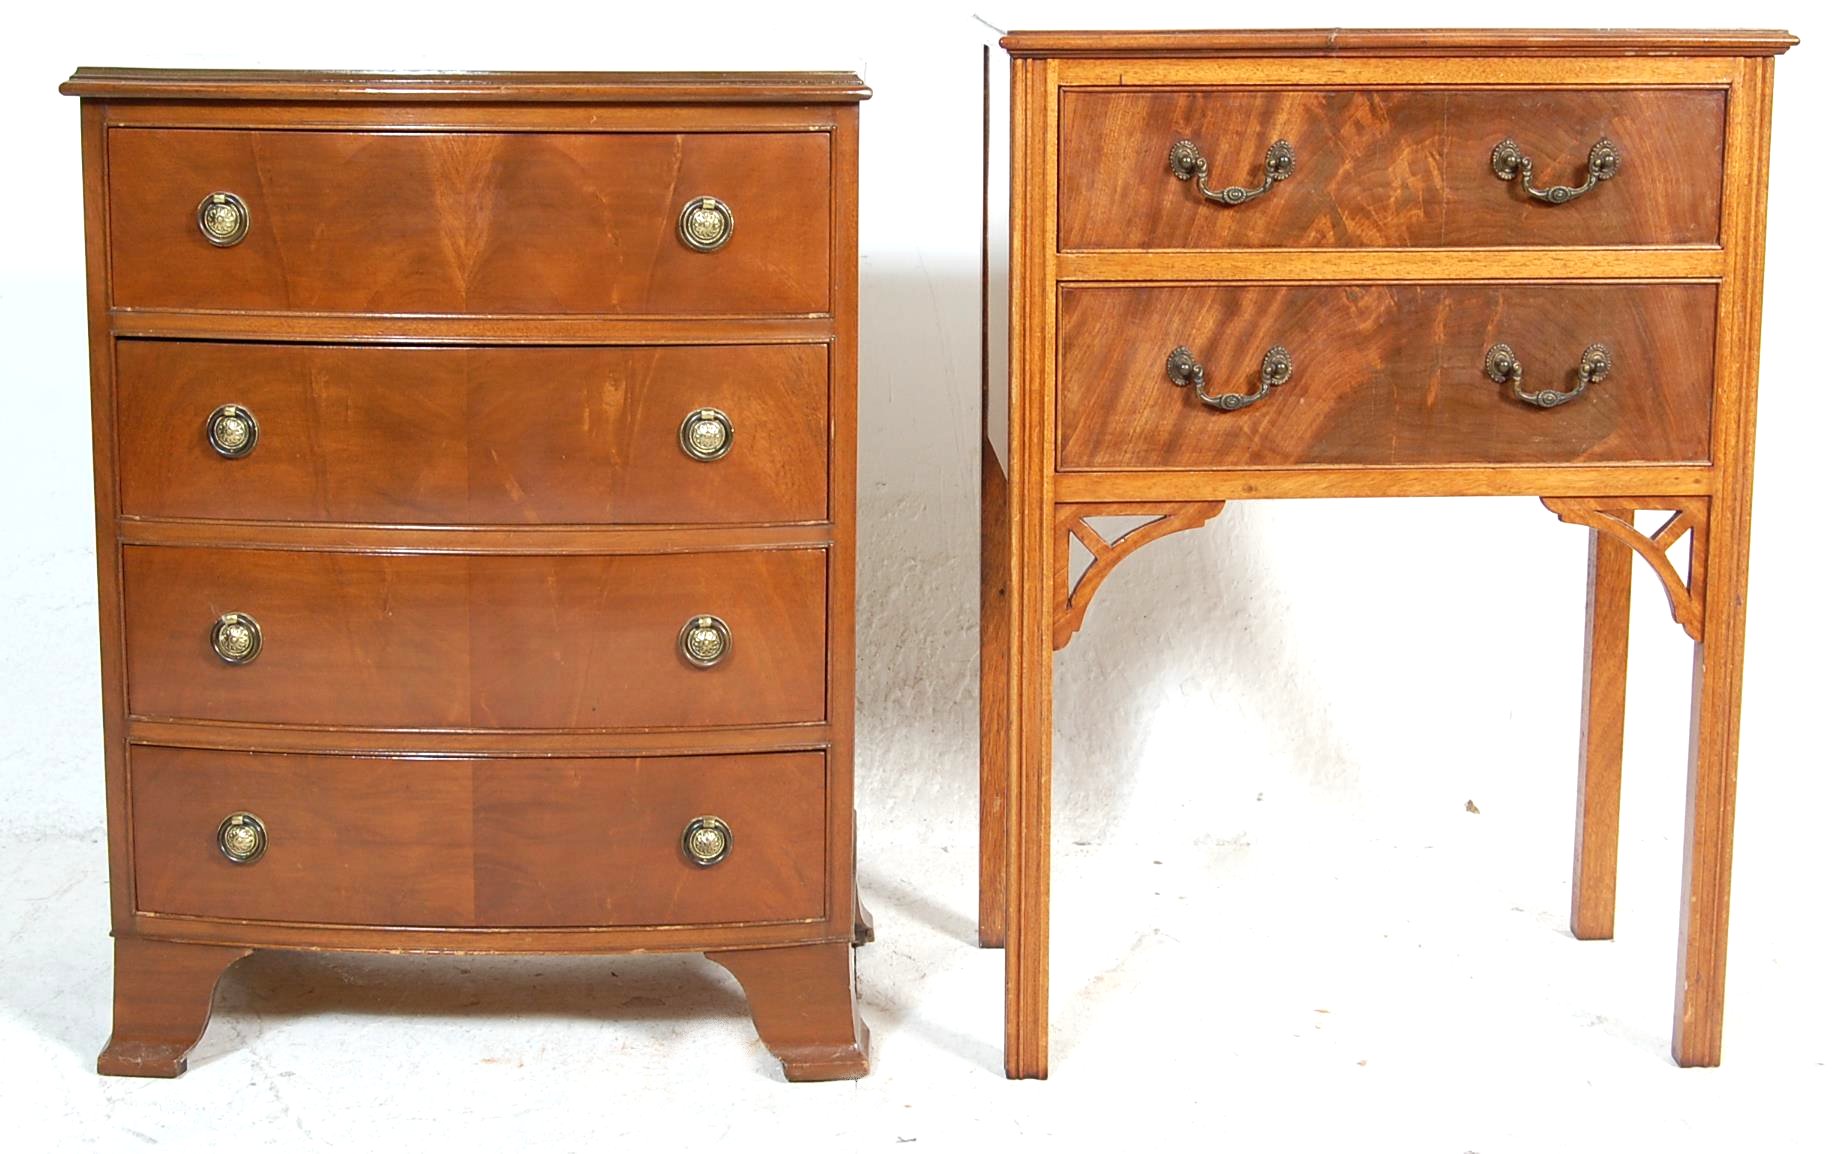 AN EARLY 20TH CENTURY MAHOGANY BOW FRONT BACHELOR CHEST OF DRAWERS AND BEDSIDE CABINET - Image 2 of 6